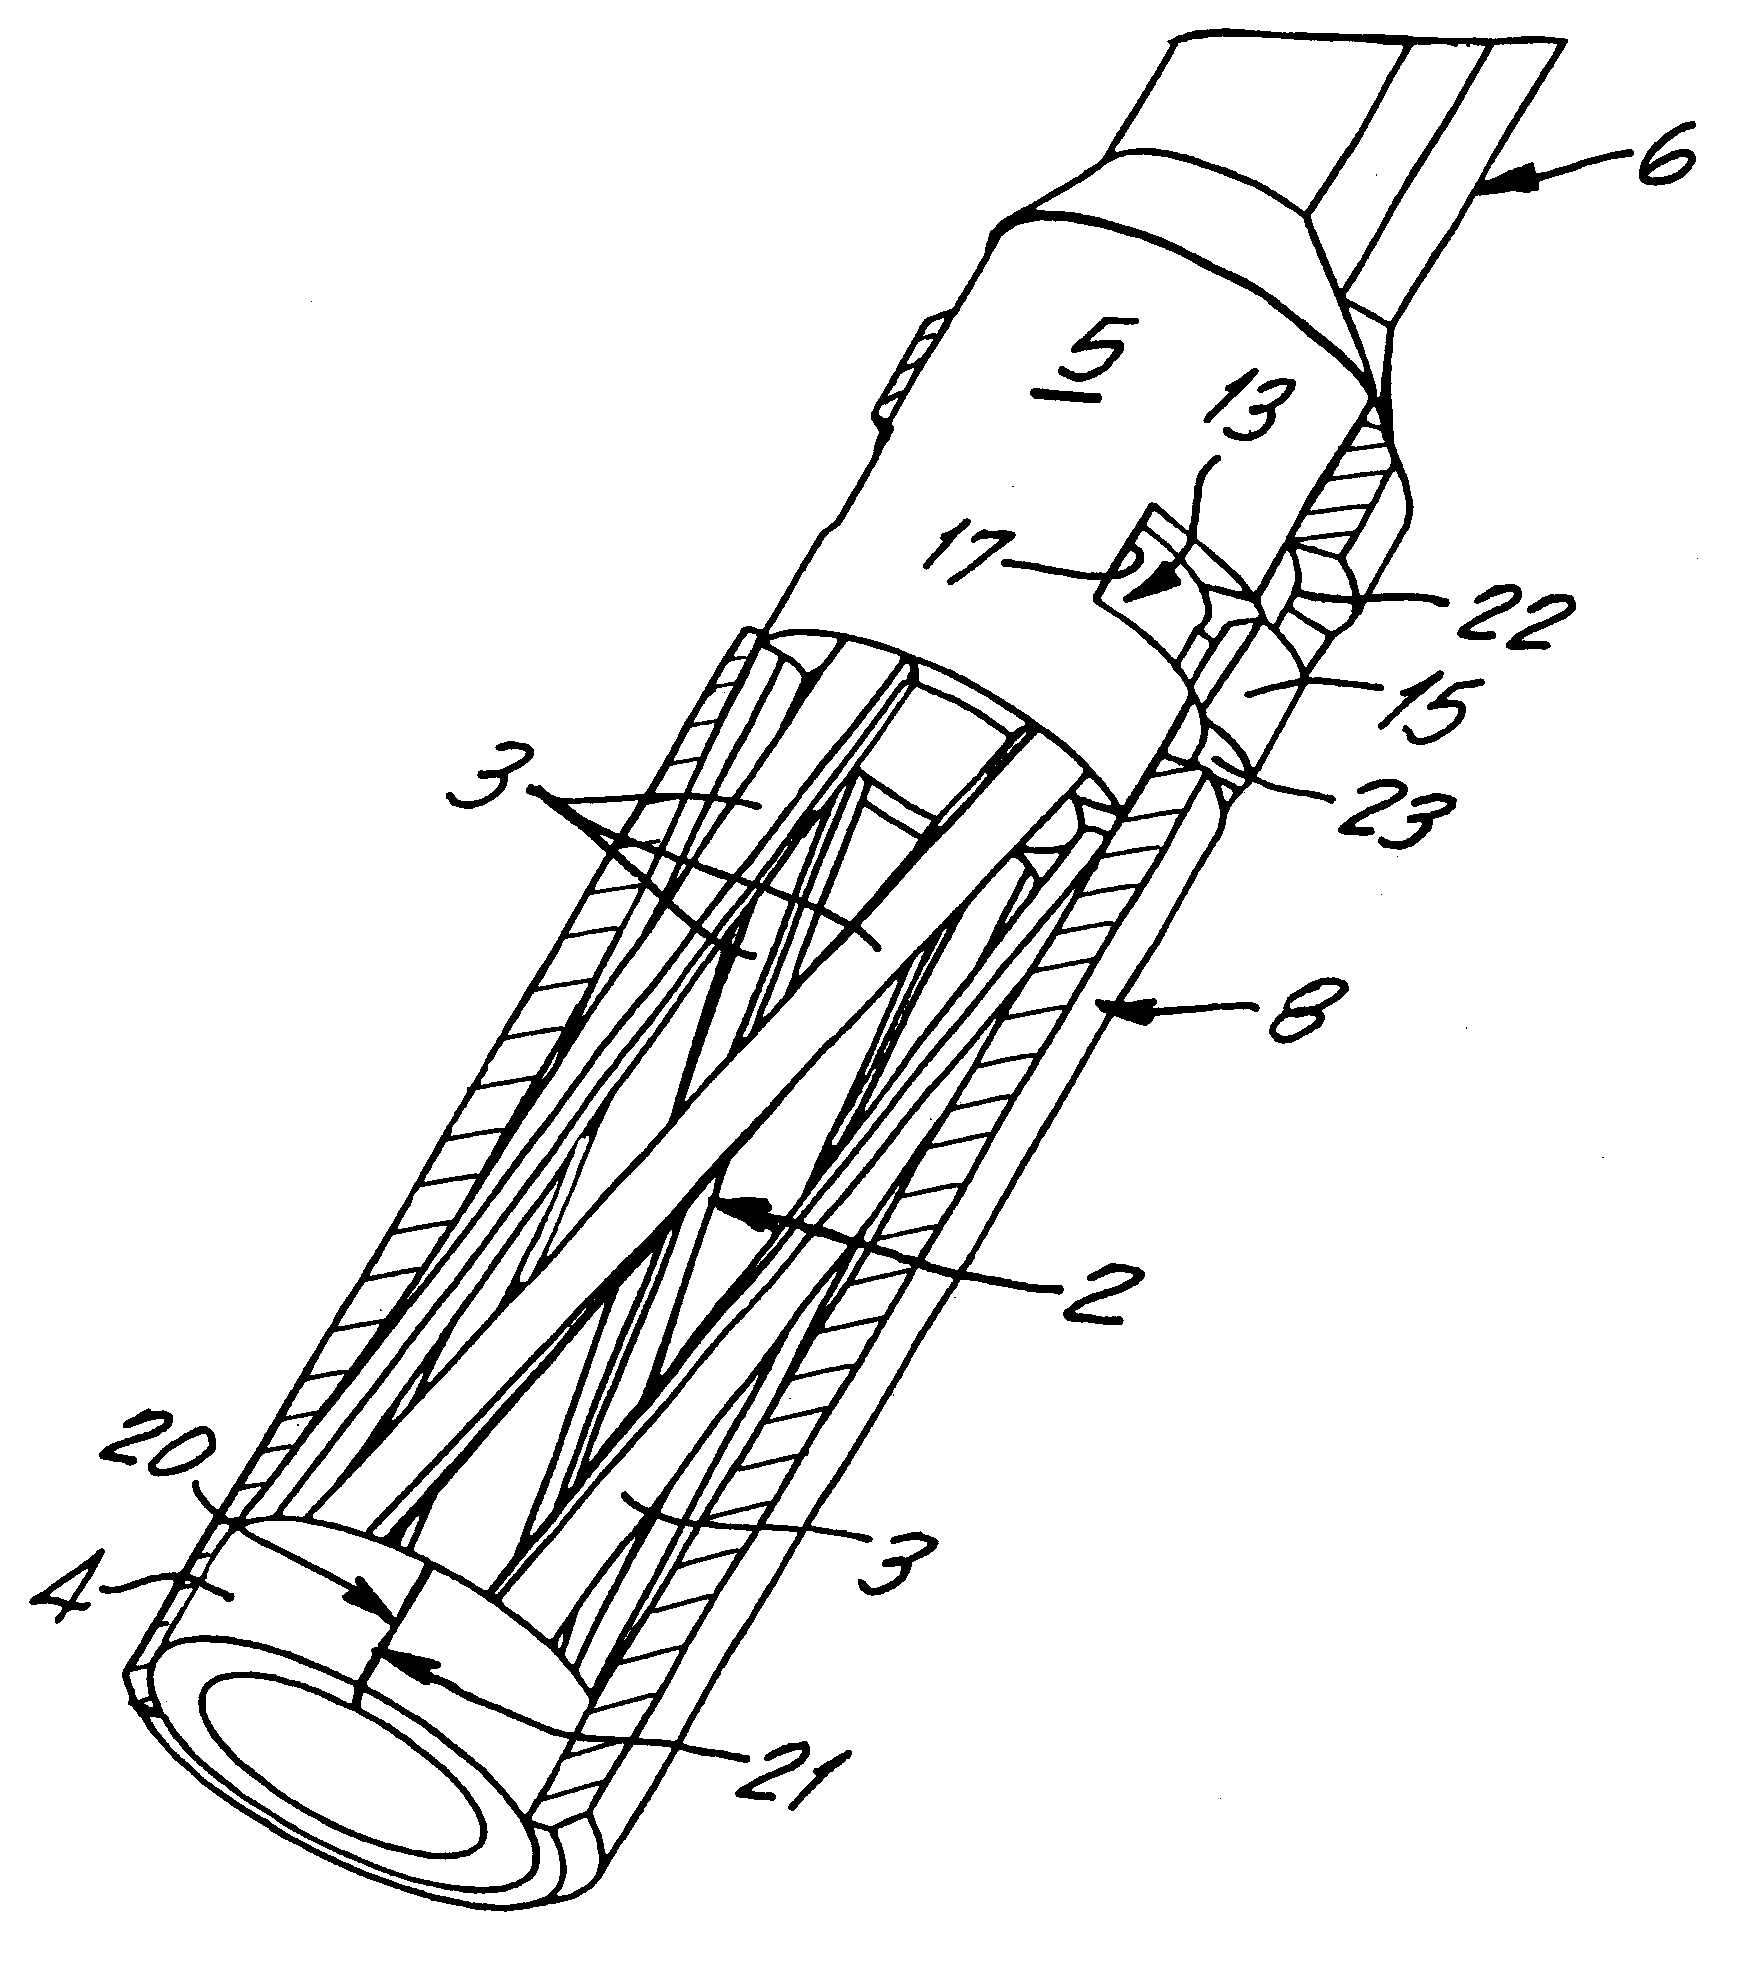 Contact socket for electrical pin-and-socket connector